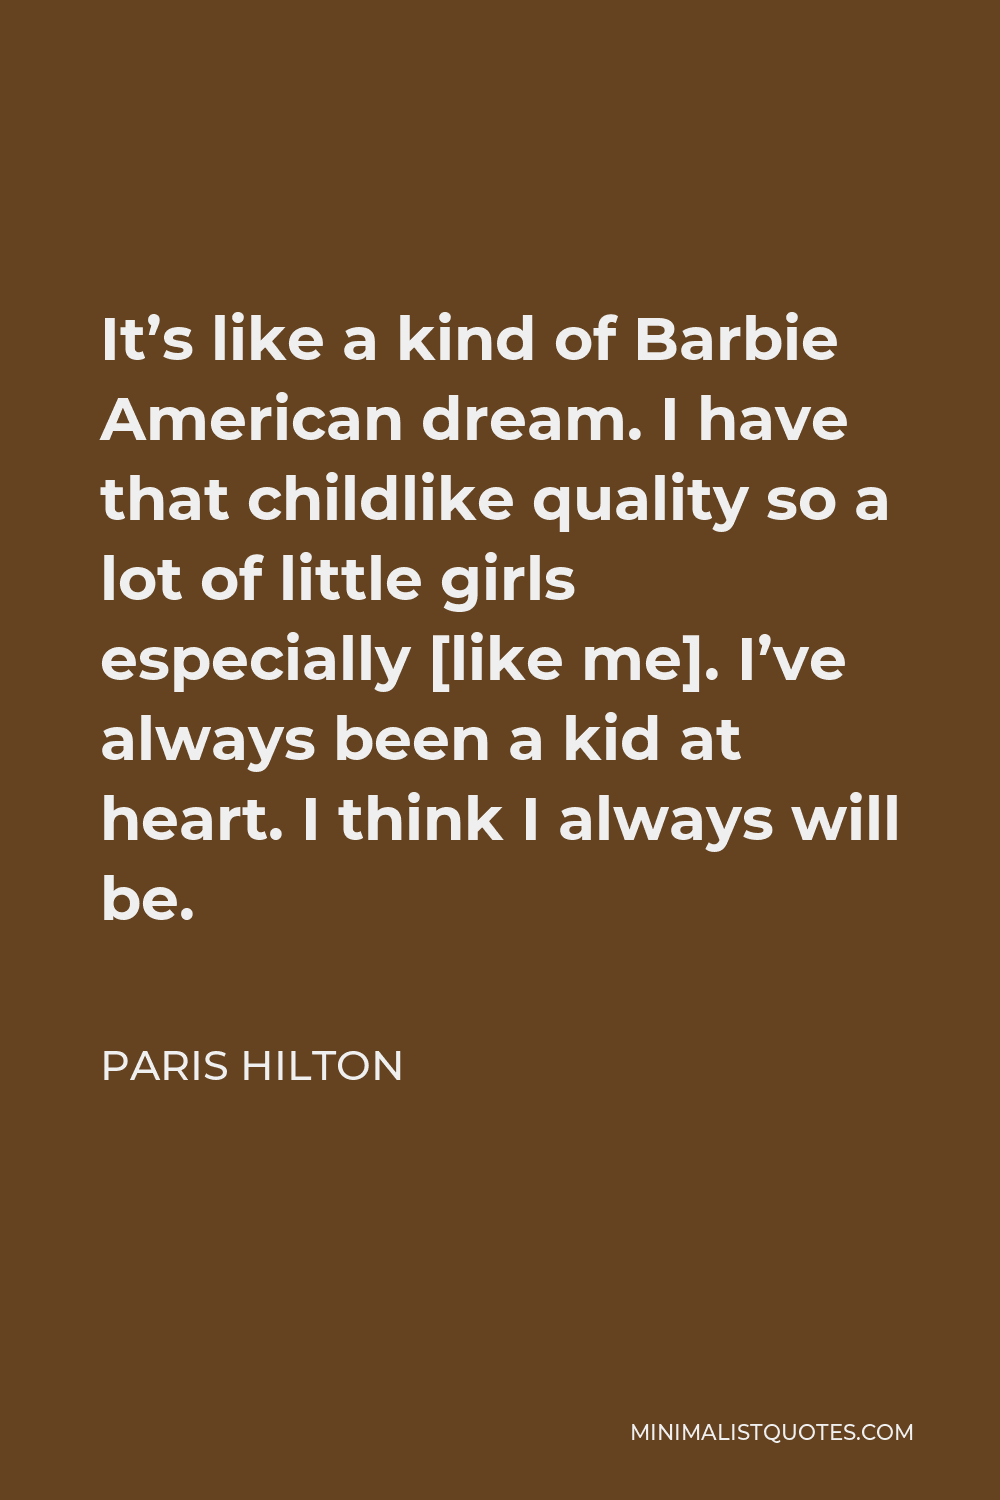 Paris Hilton Quote - It’s like a kind of Barbie American dream. I have that childlike quality so a lot of little girls especially [like me]. I’ve always been a kid at heart. I think I always will be.